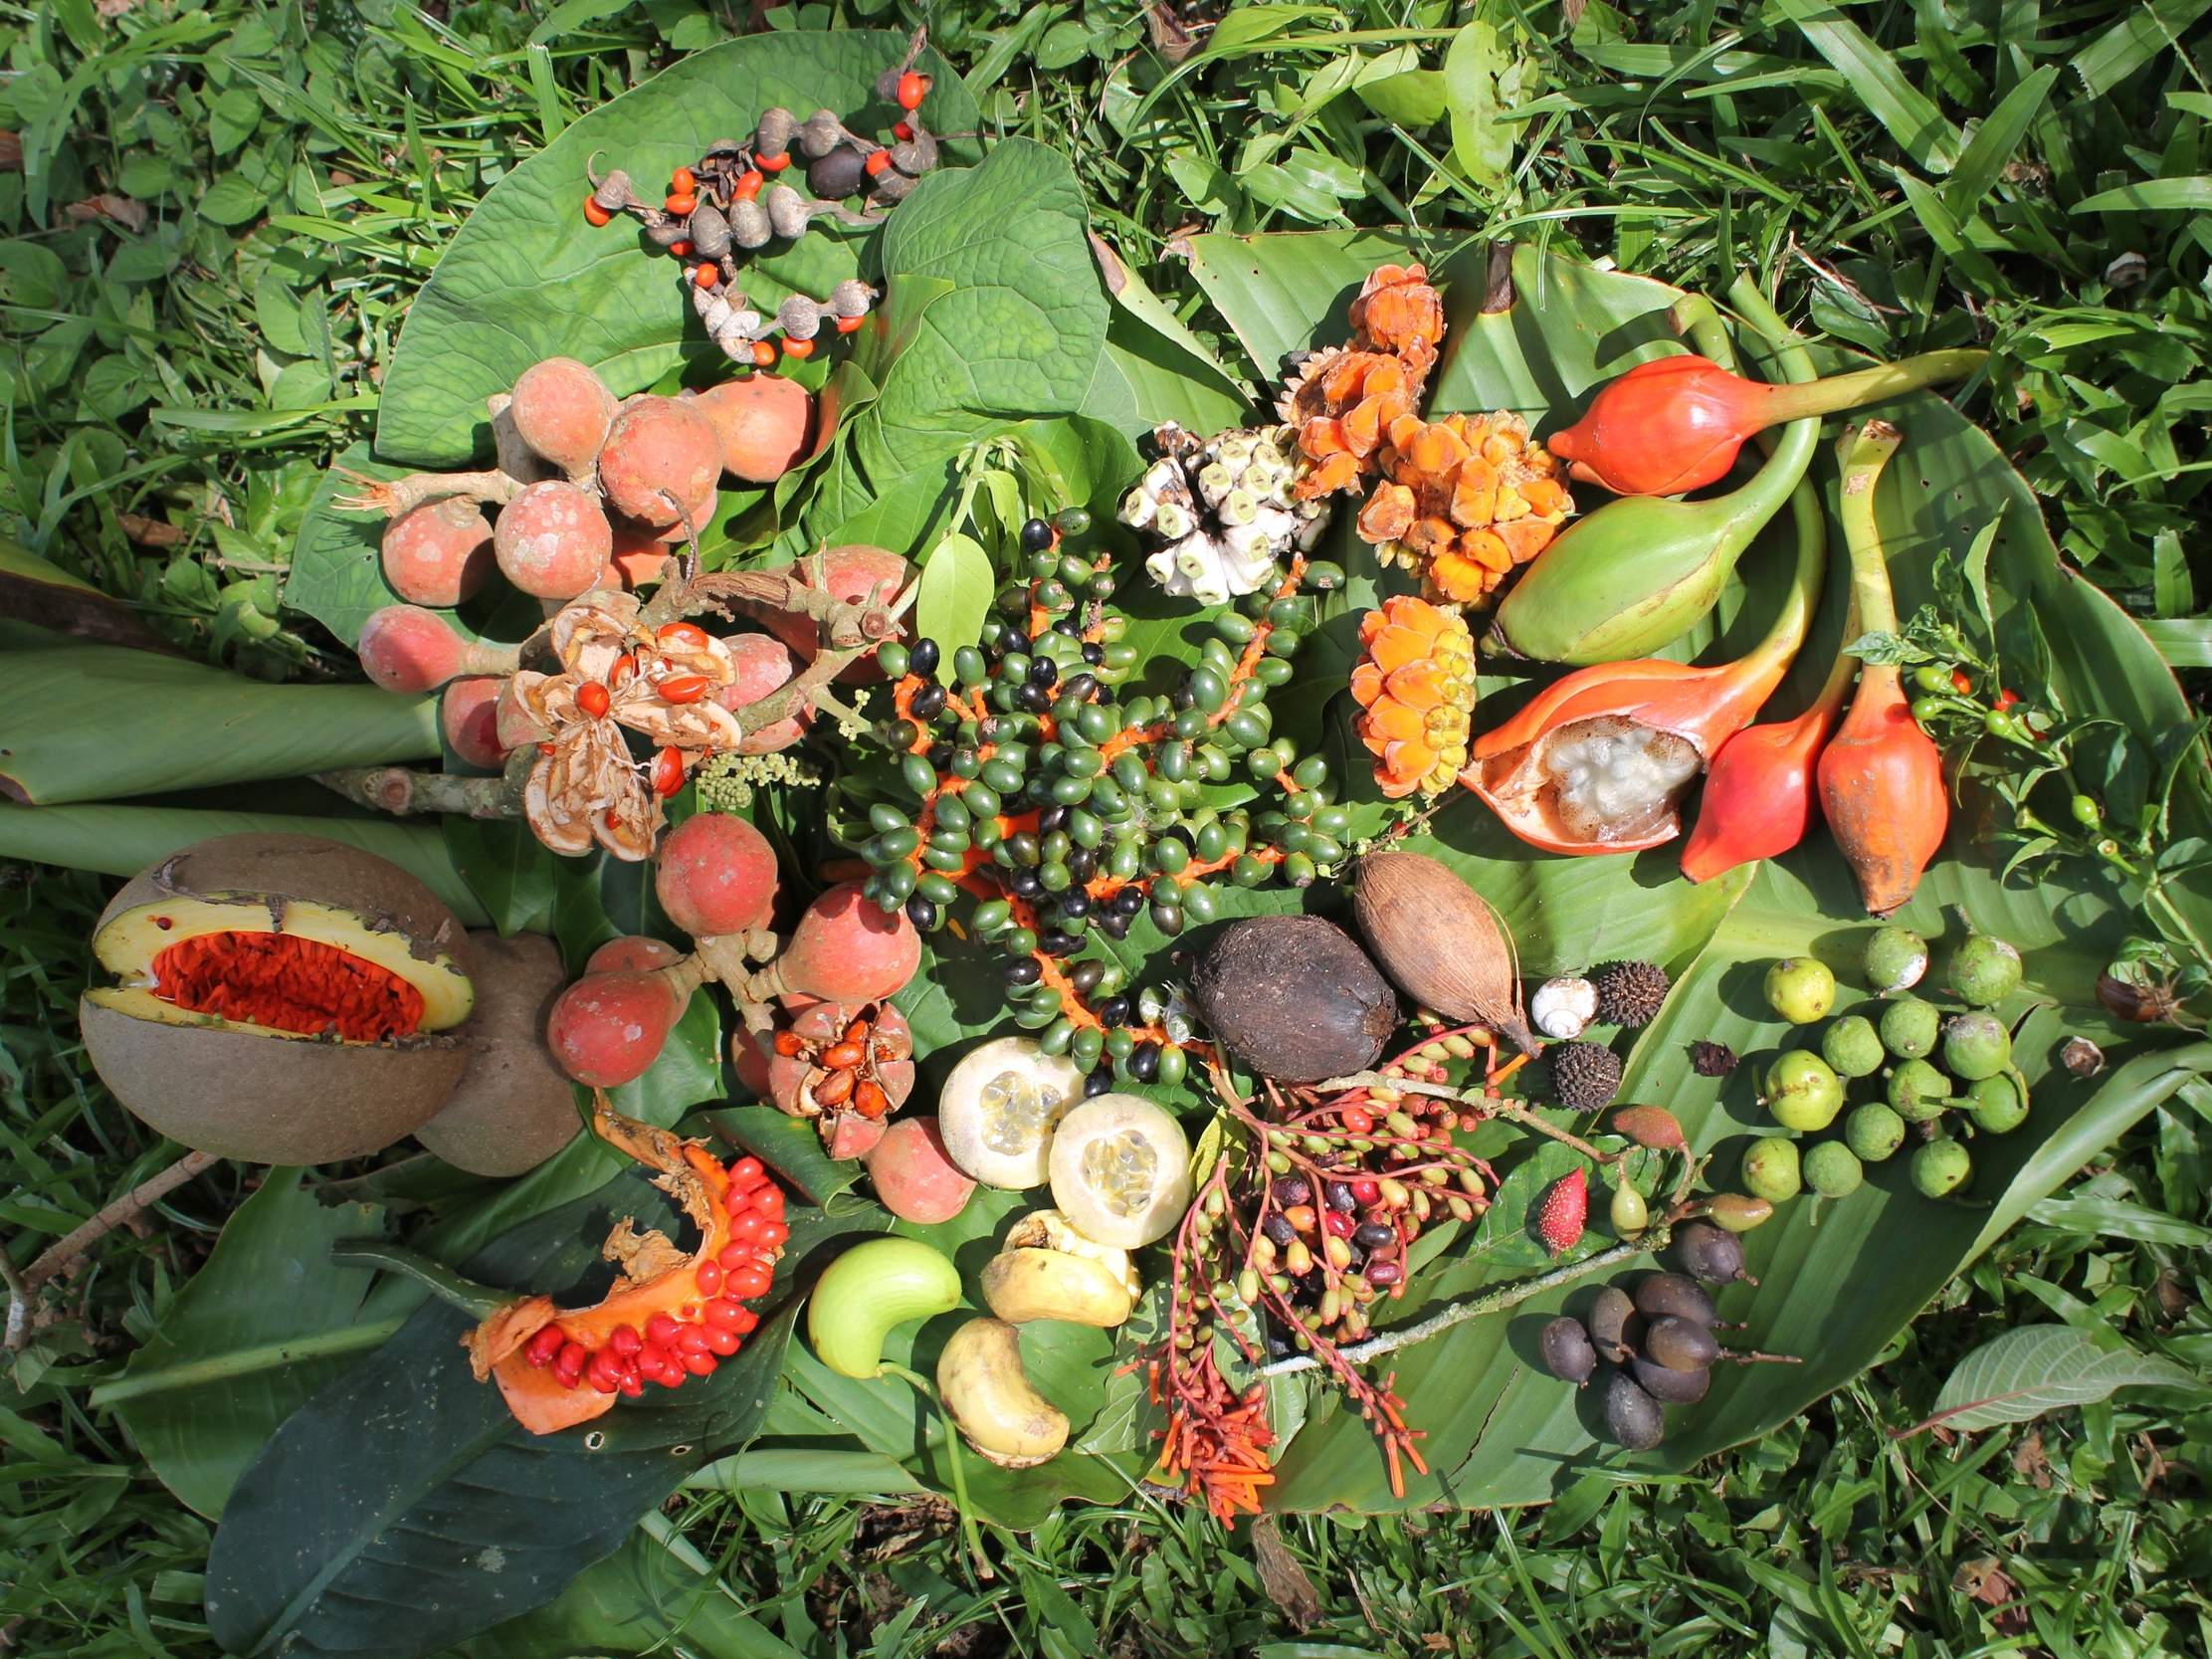 A cornucopia of forest products harvested from the jungle